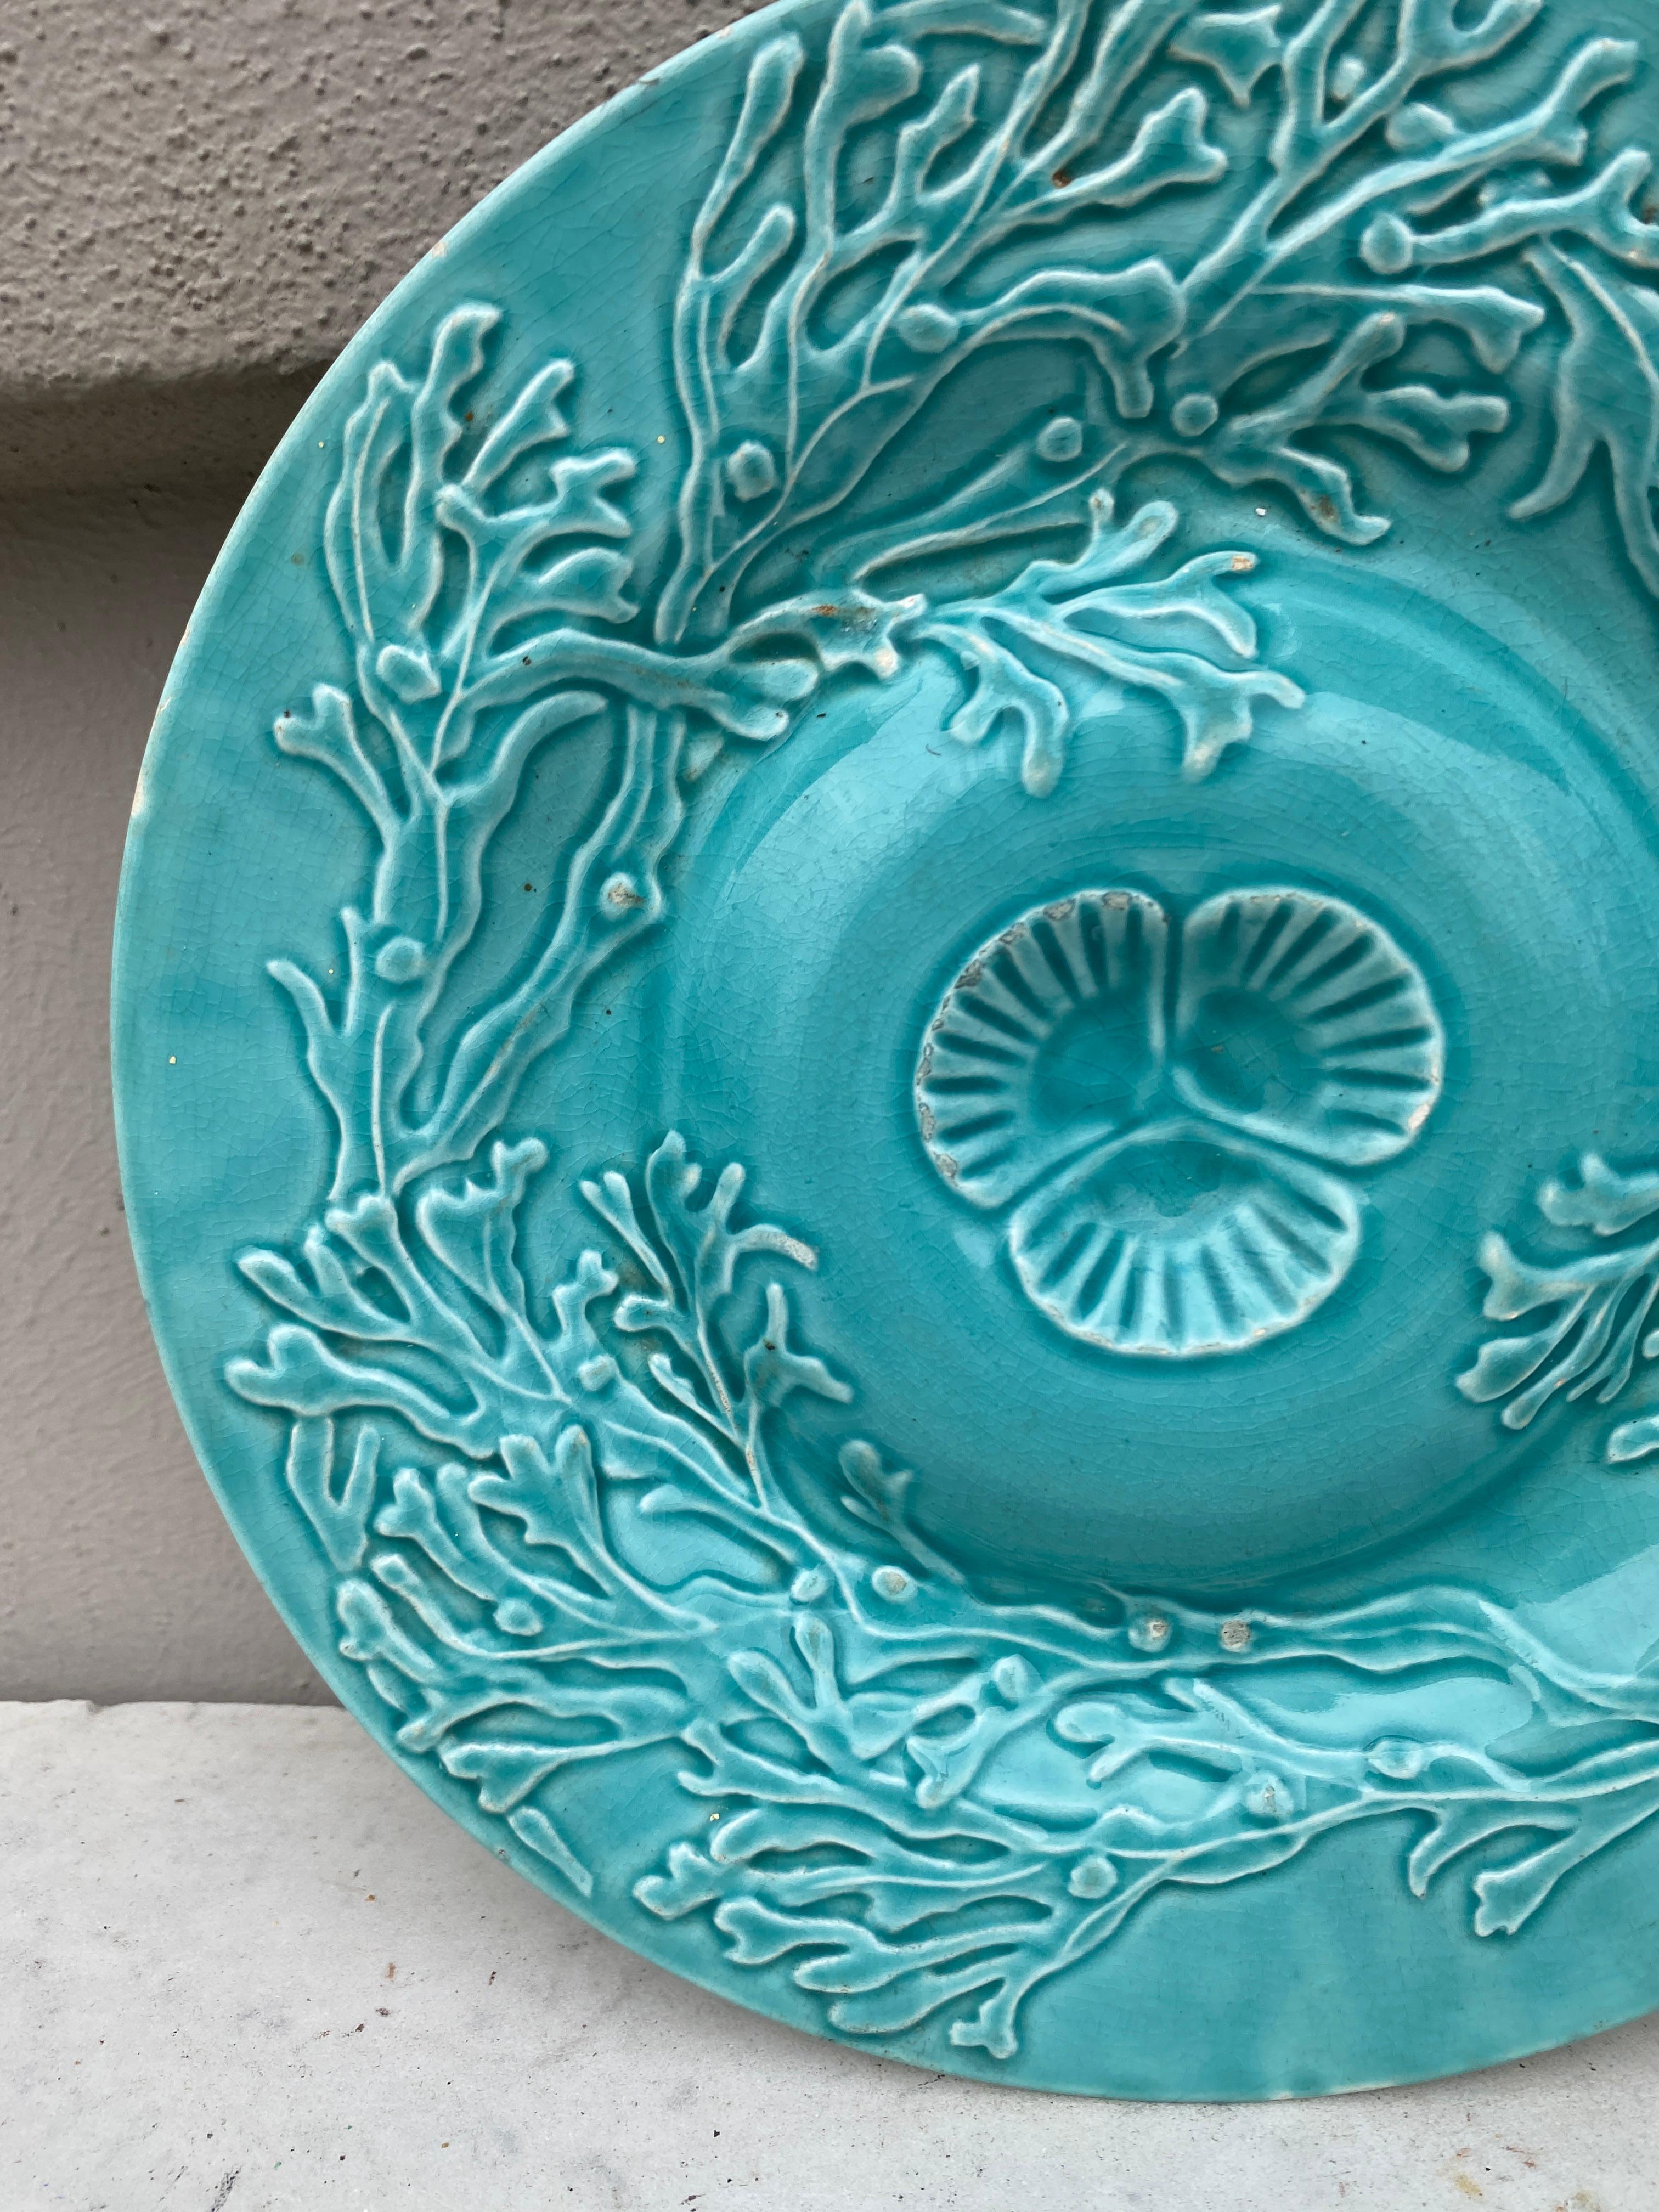 Majolica aqua turquoise shell plate with seaweeds signed Gien, circa 1890.
Small wears.